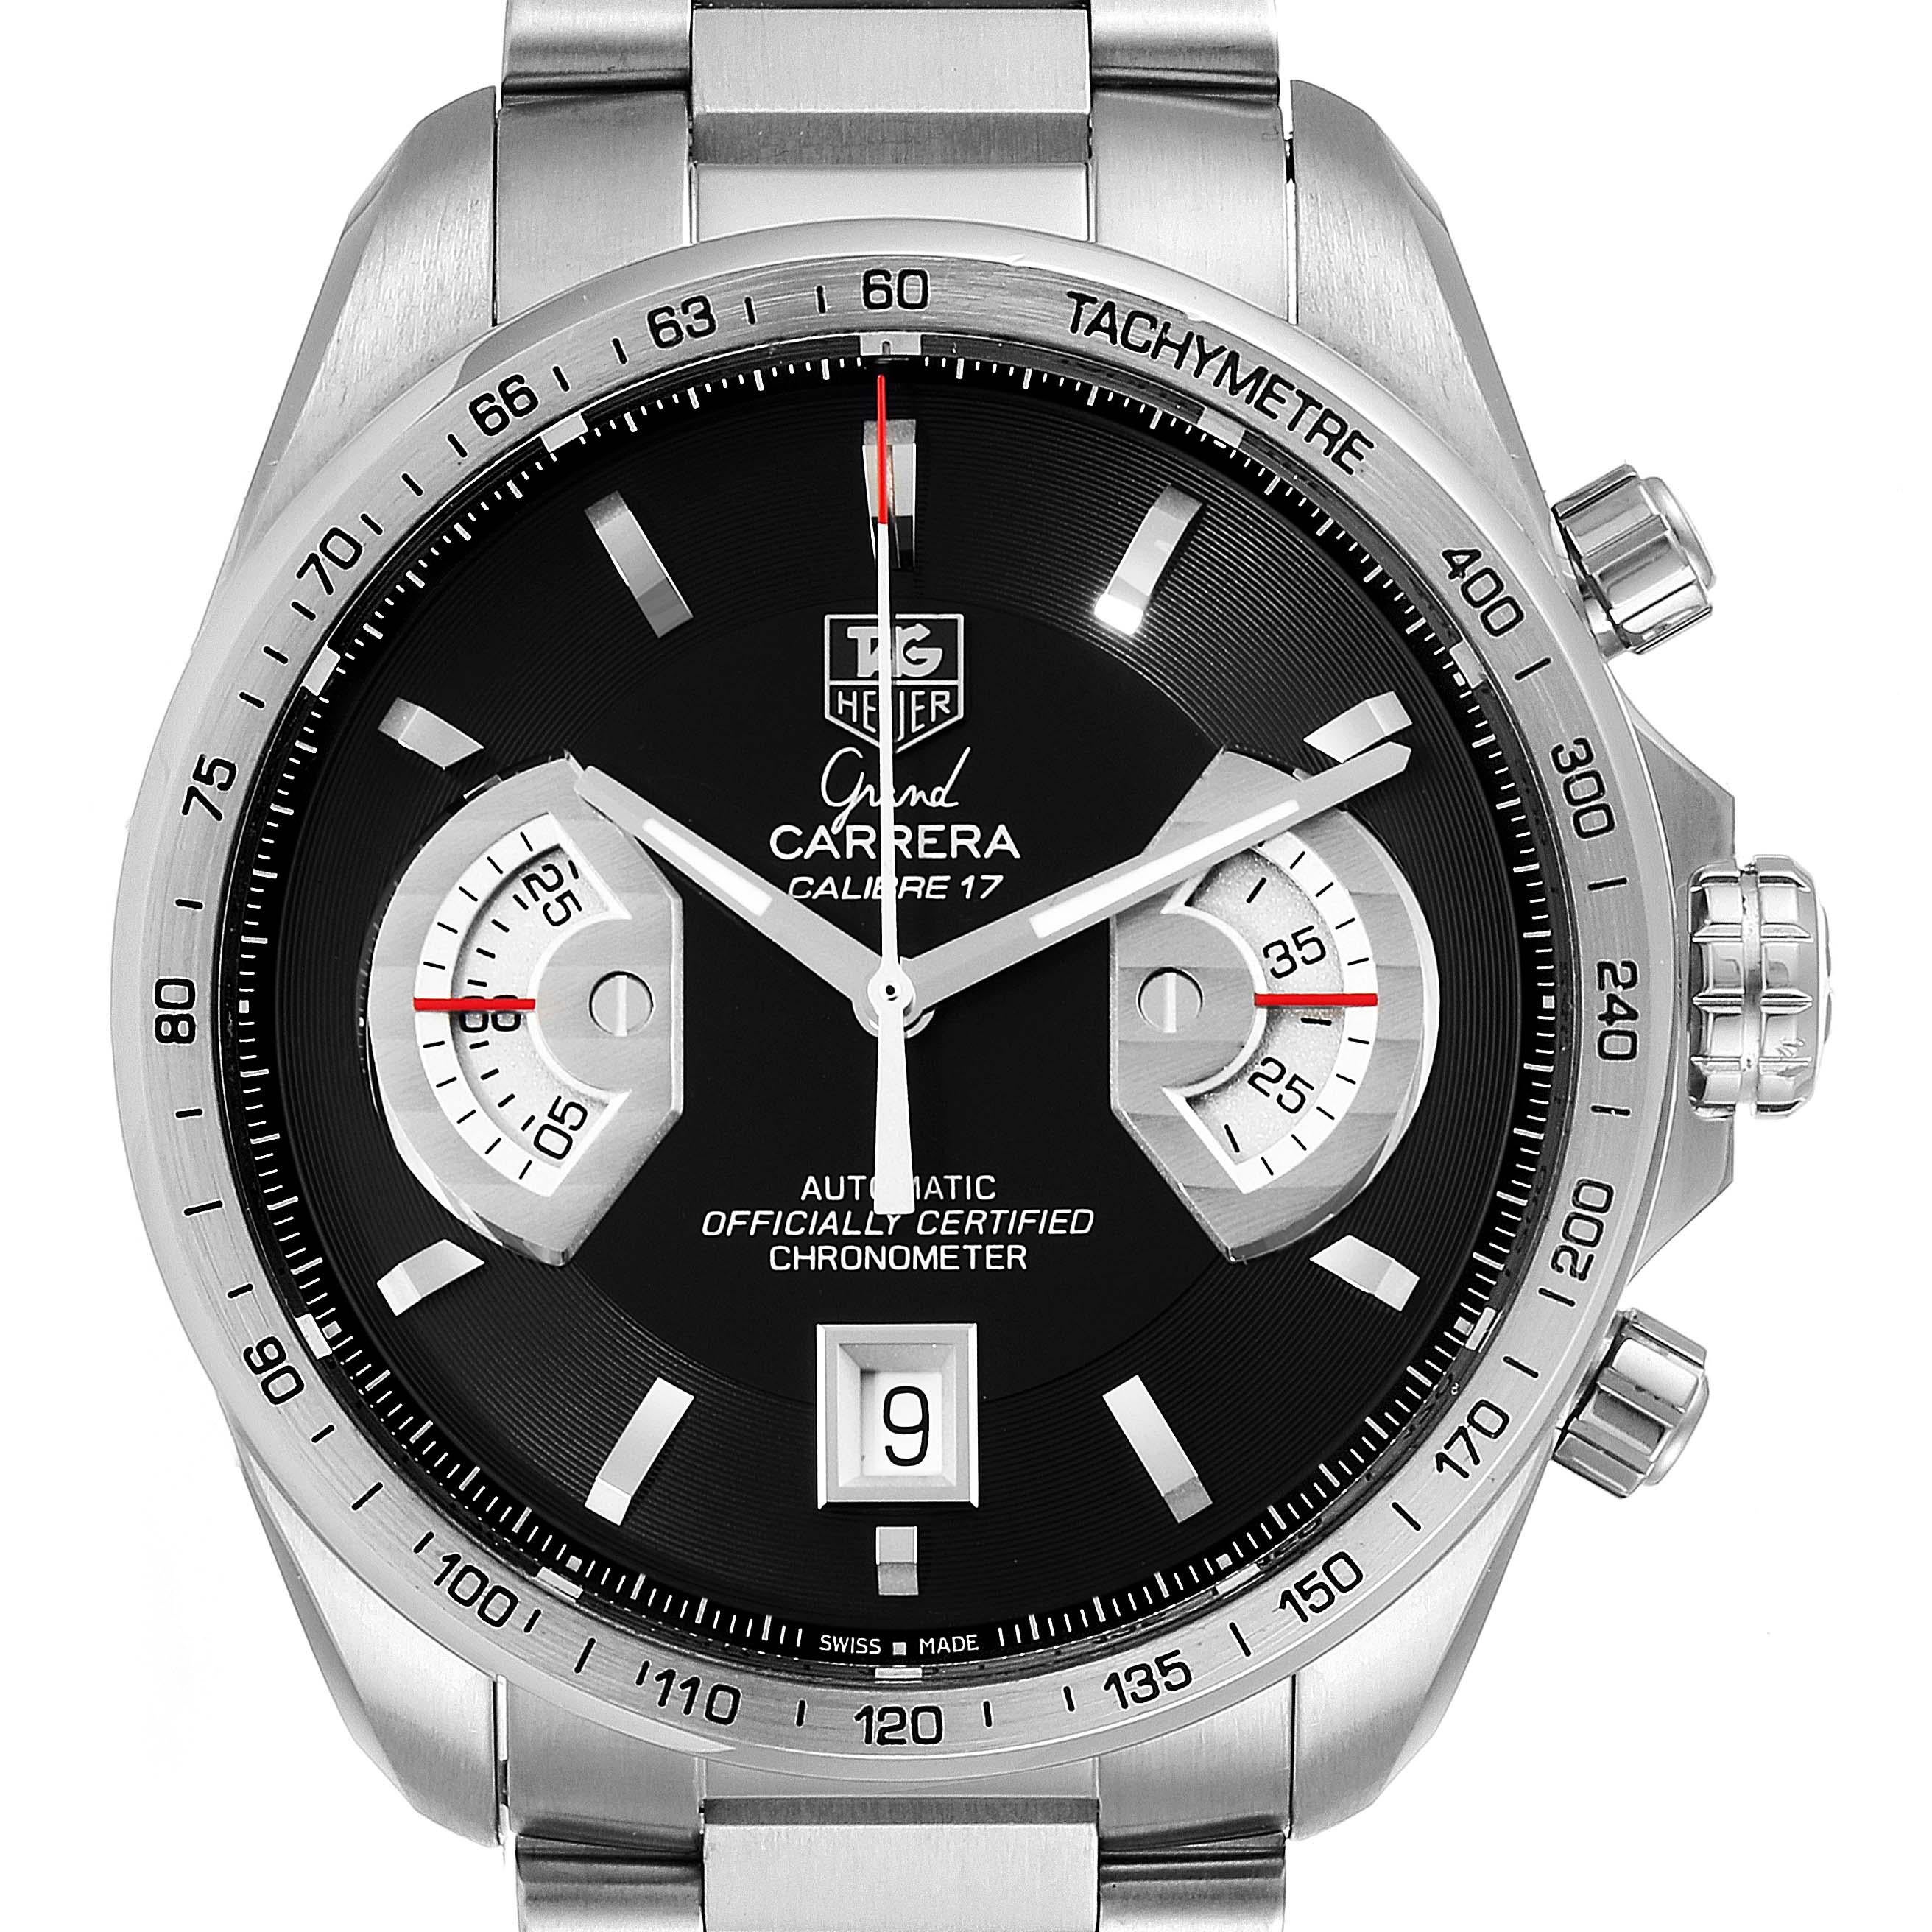 Tag Heuer Grand Carrera Black Dial Automatic Mens Watch CAV511A. Automatic self-winding movement. Stainless steel case 43.0 mm. Transperent sapphire crystal back. Stainless steel bezel with tachymeter scale. Scratch resistant sapphire crystal. Black